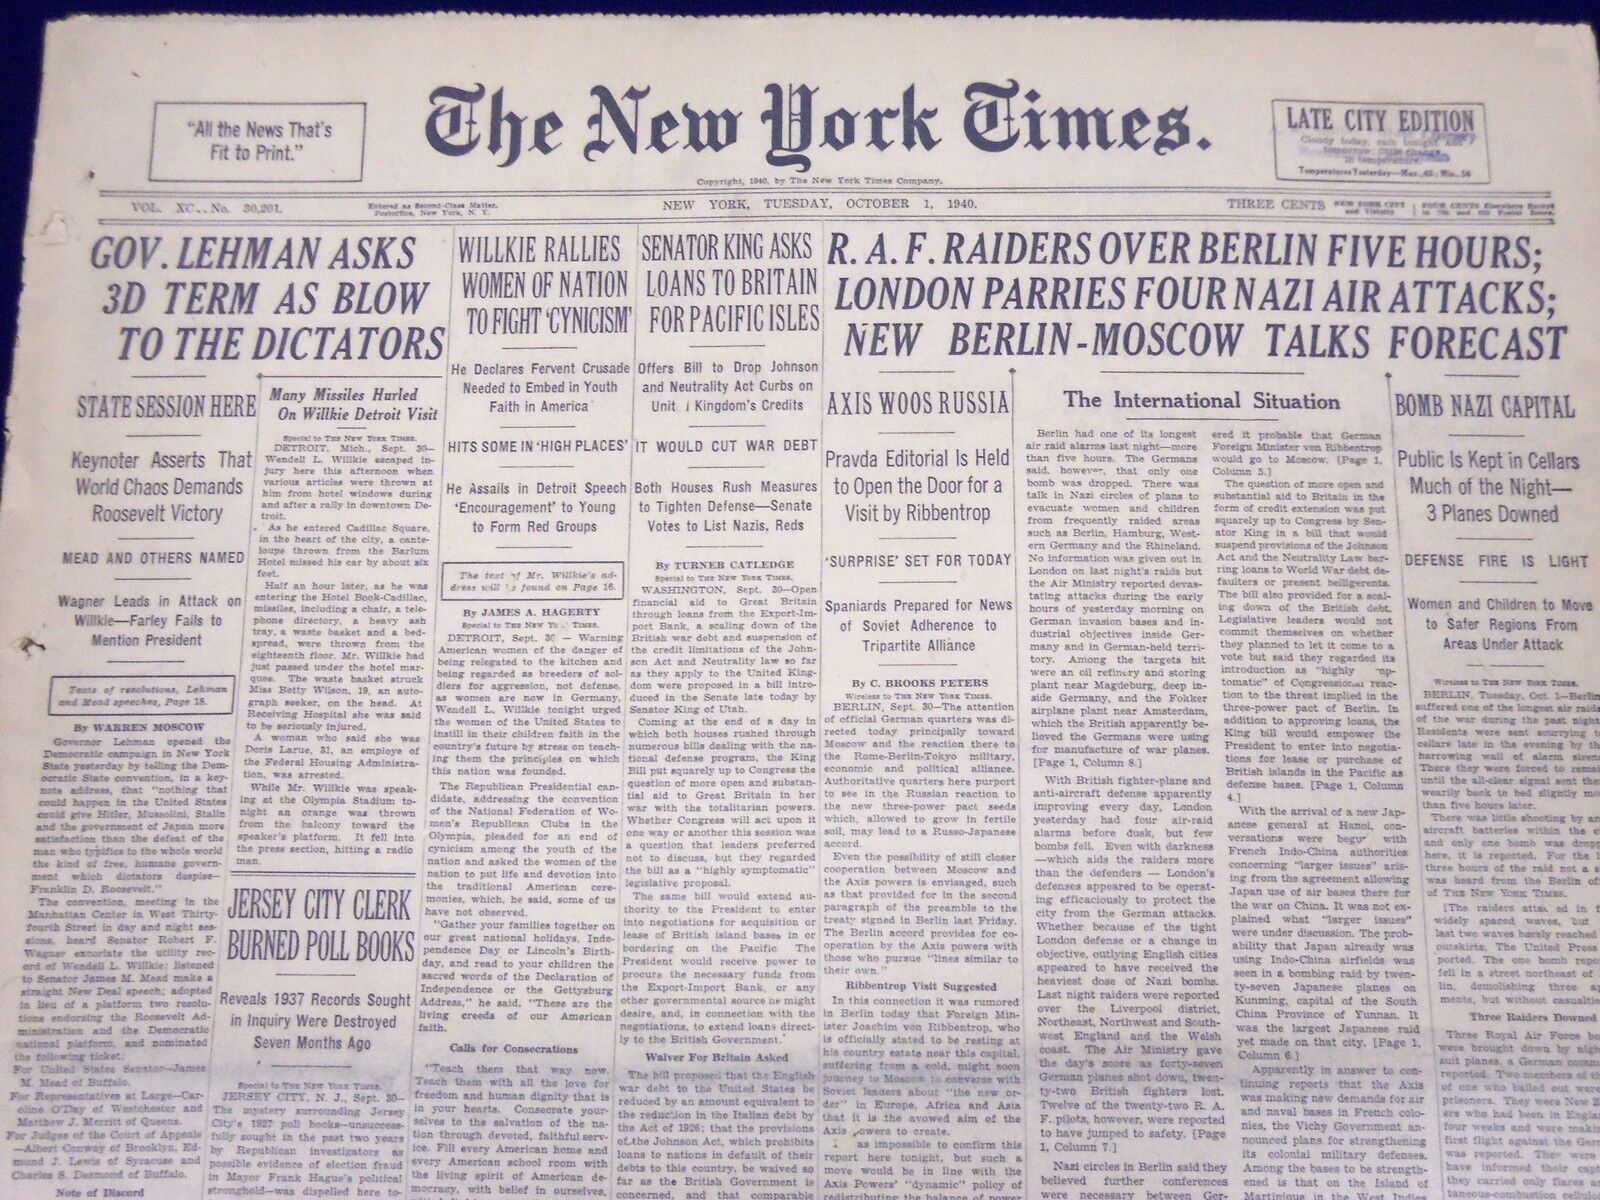 1940 OCT 1 NEW YORK TIMES NEWSPAPER - GOVERNOR LEHMAN ASKS 3RD TERM - NT 23